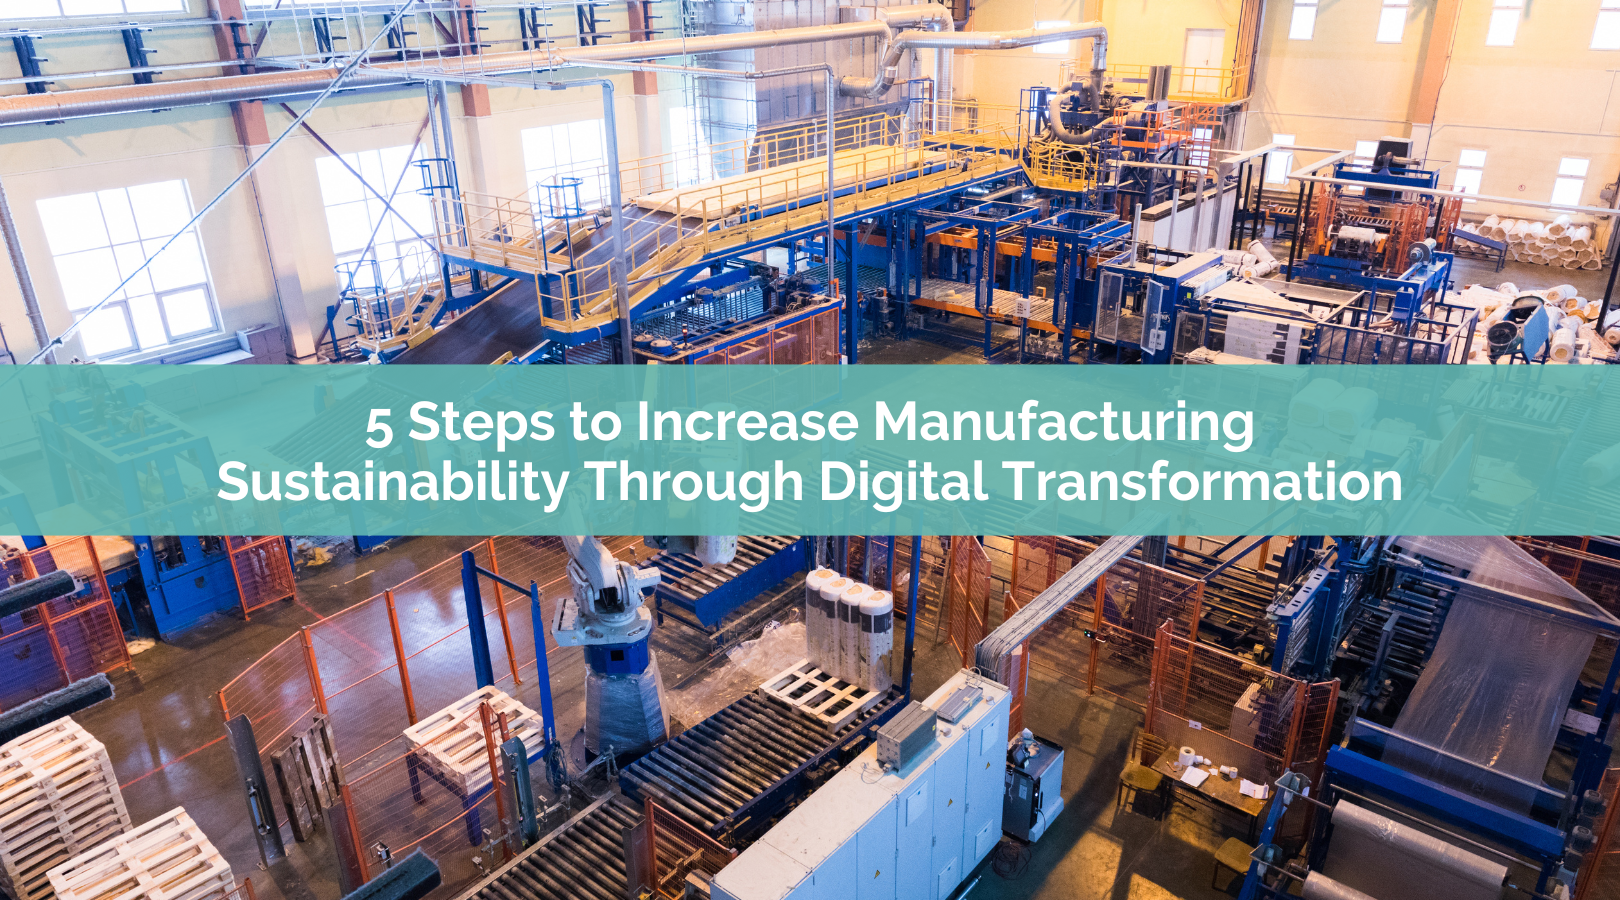 5 Steps to Increase Manufacturing Sustainability Through Digital Transformation (1)